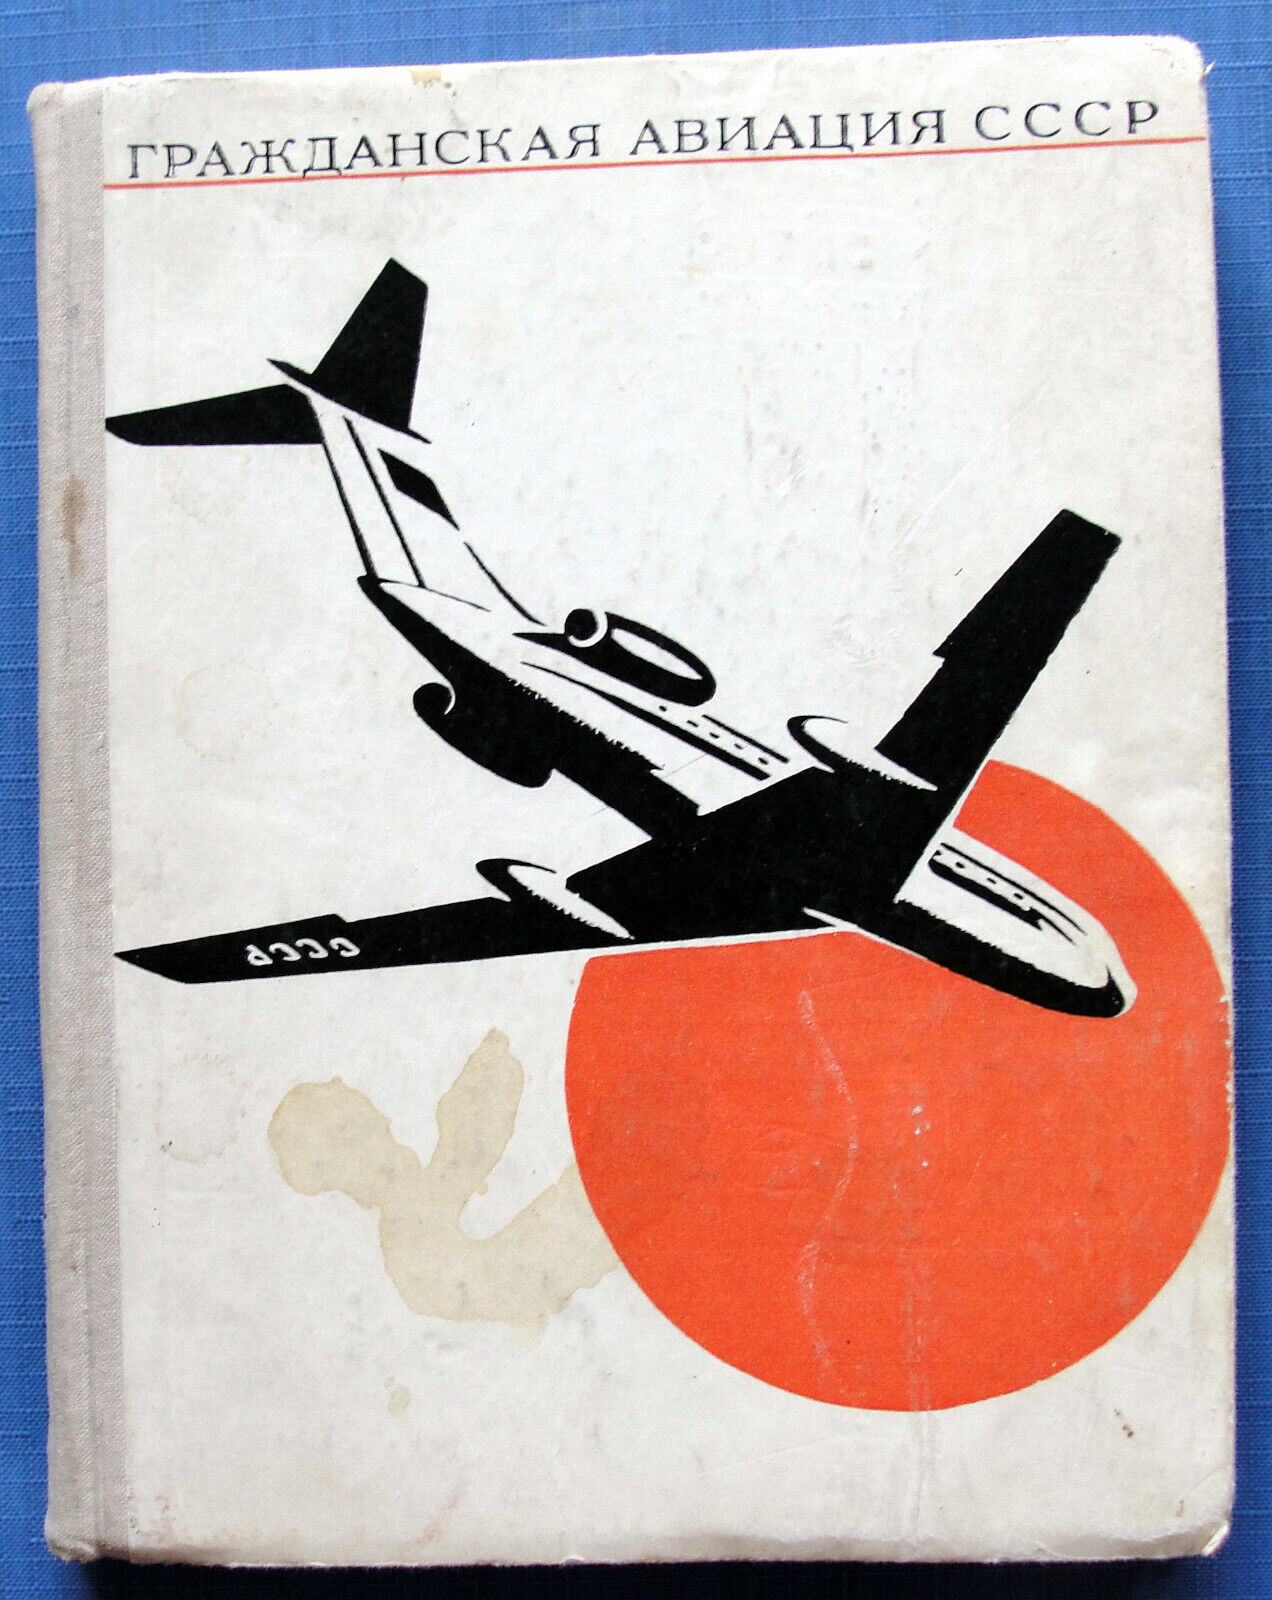 1967 Civil aviation of the USSR Aircraft Plane Russian Vintage Illustrated Book 